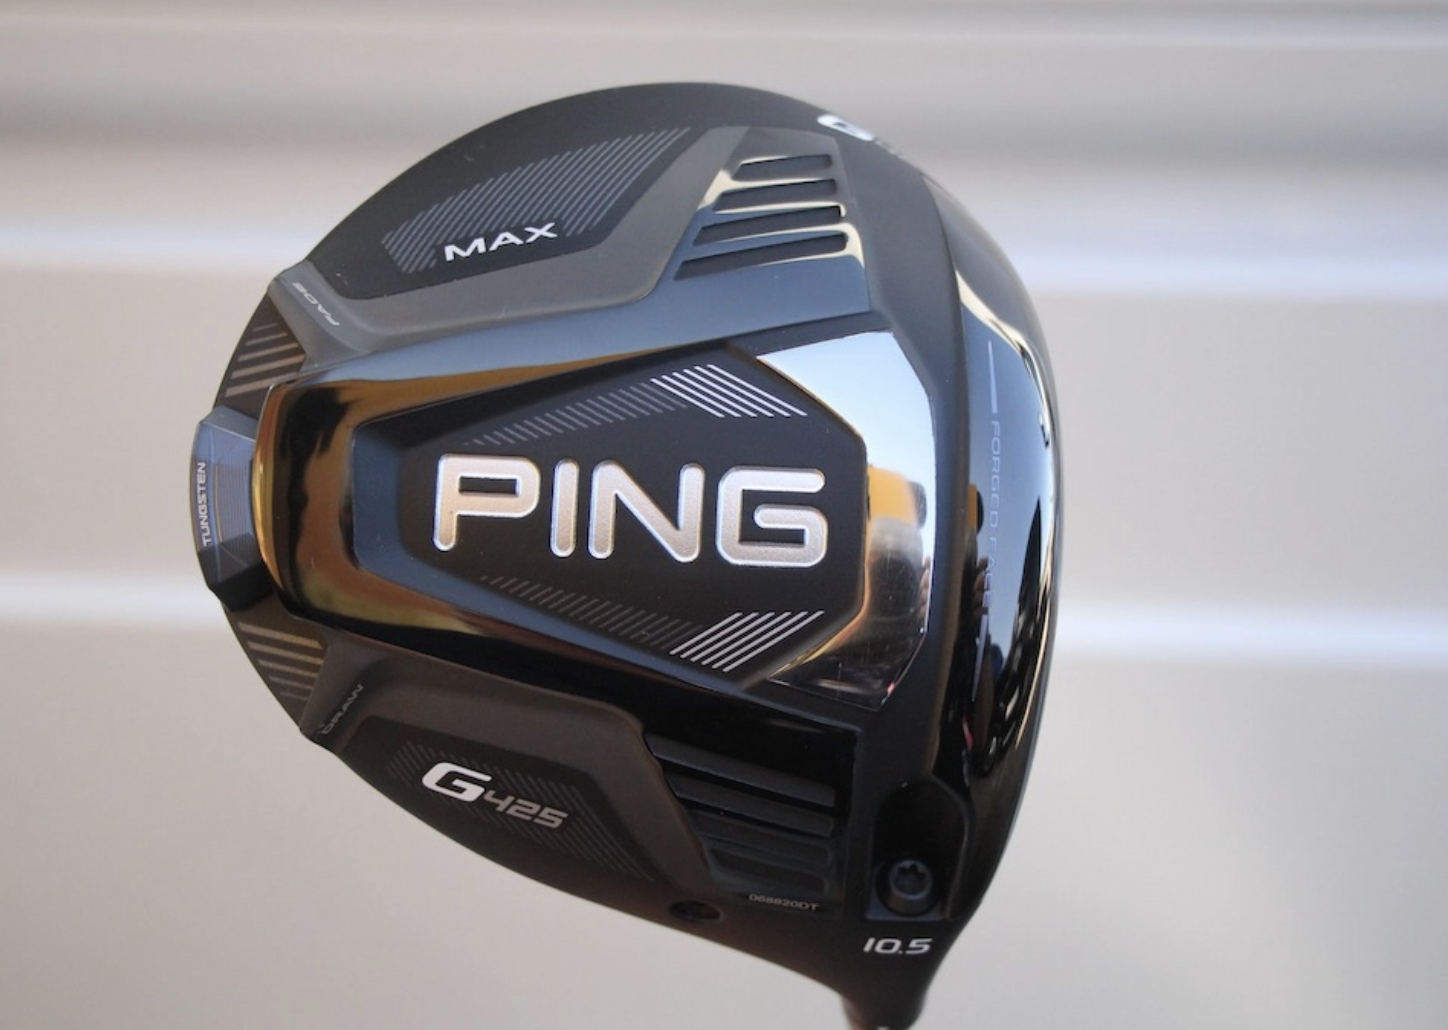 Ping G425 Max Driver Review